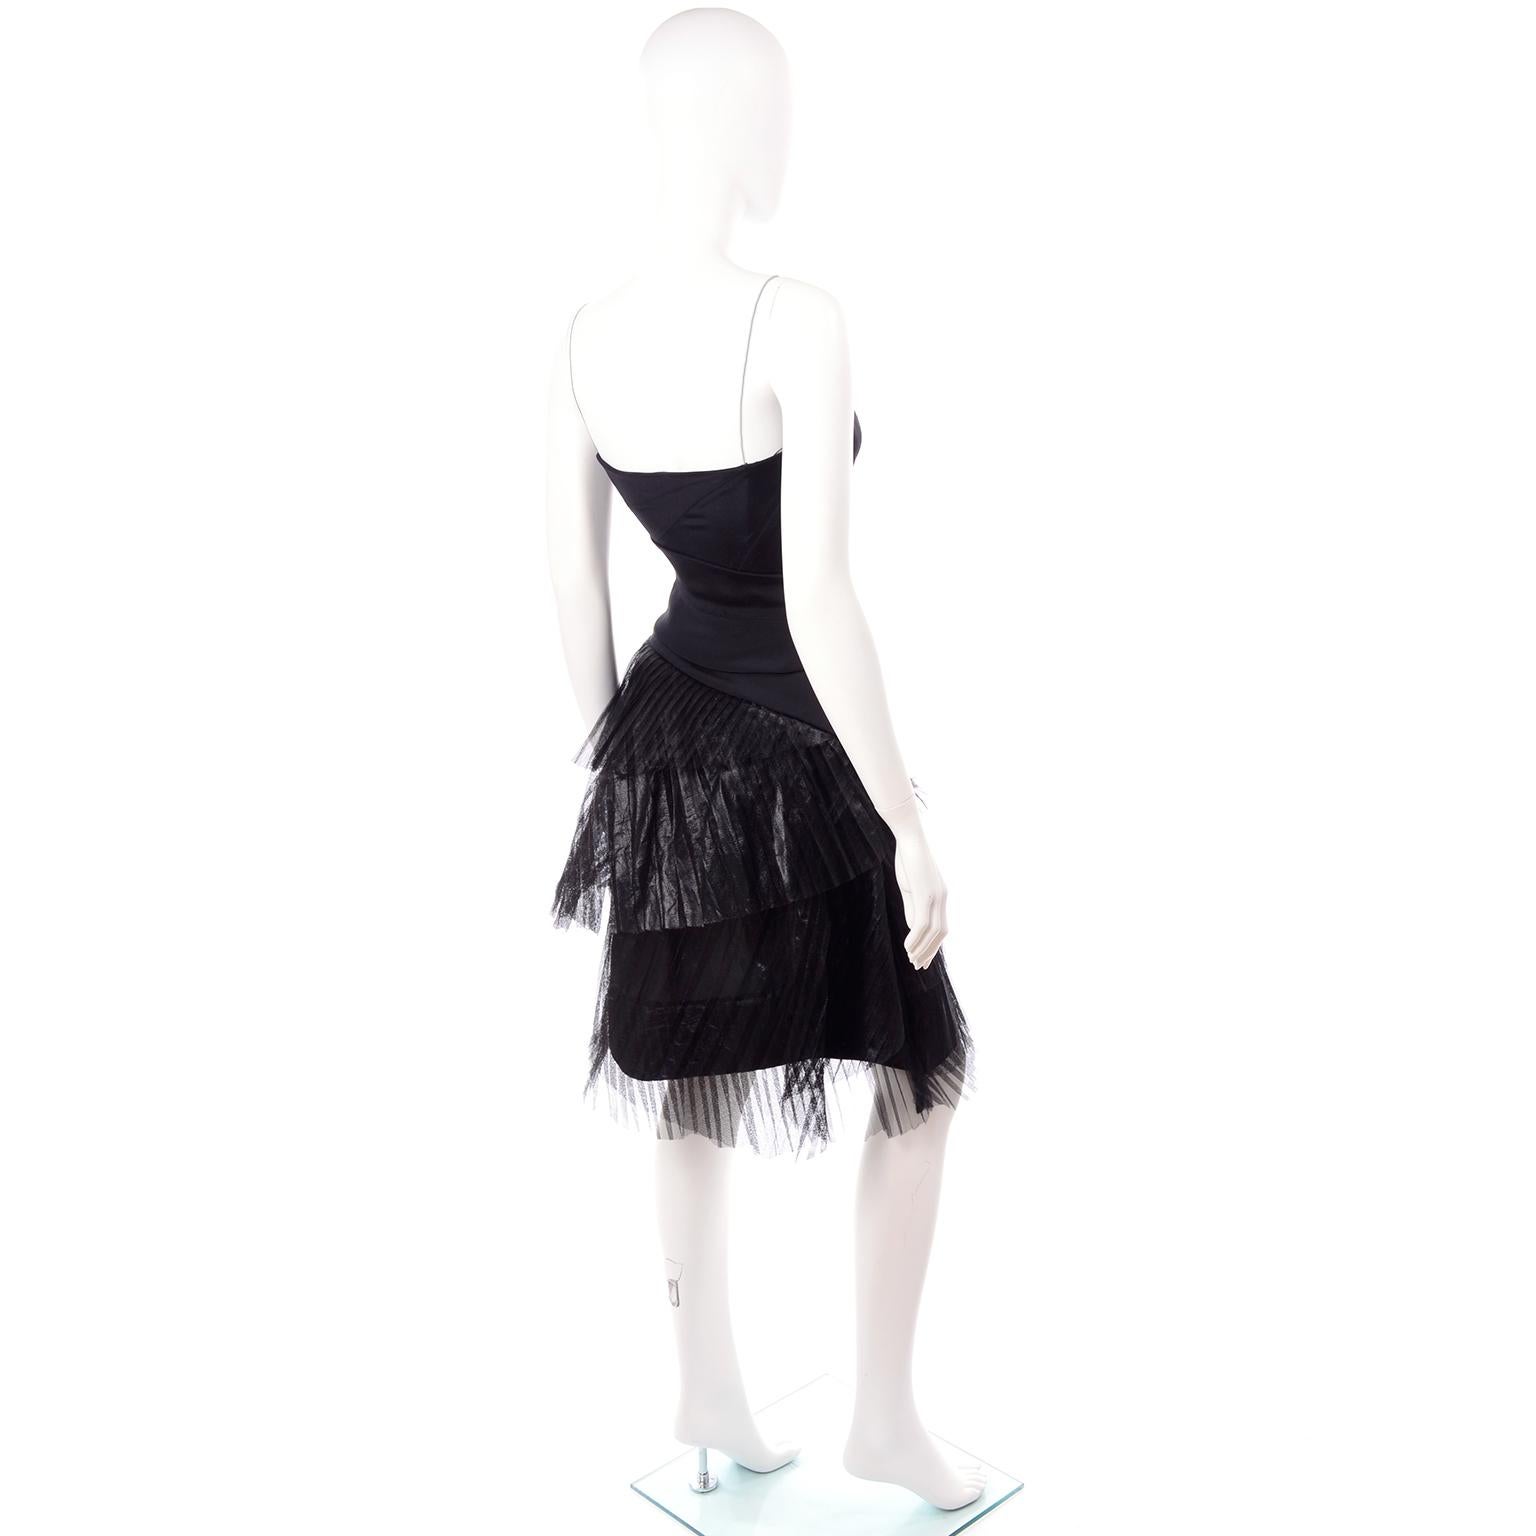 Danes Vintage Black Evening Dress With Asymmetrical Pleated Metallic Tulle Skirt In Excellent Condition For Sale In Portland, OR